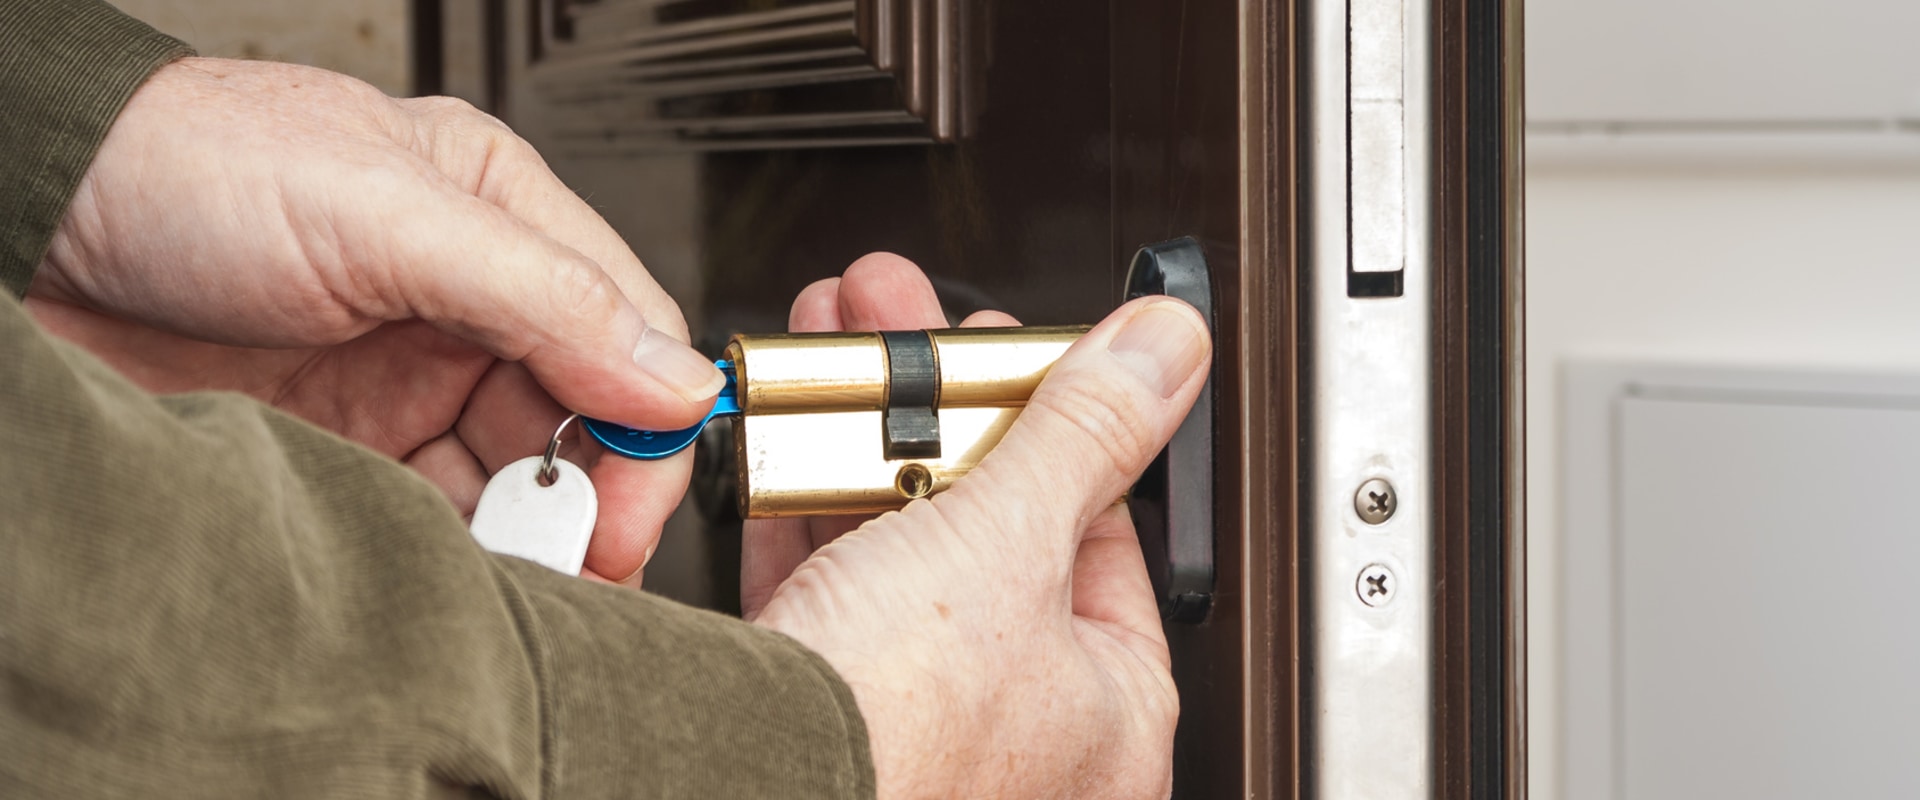 Can a Locksmith Open a Locked Safe?